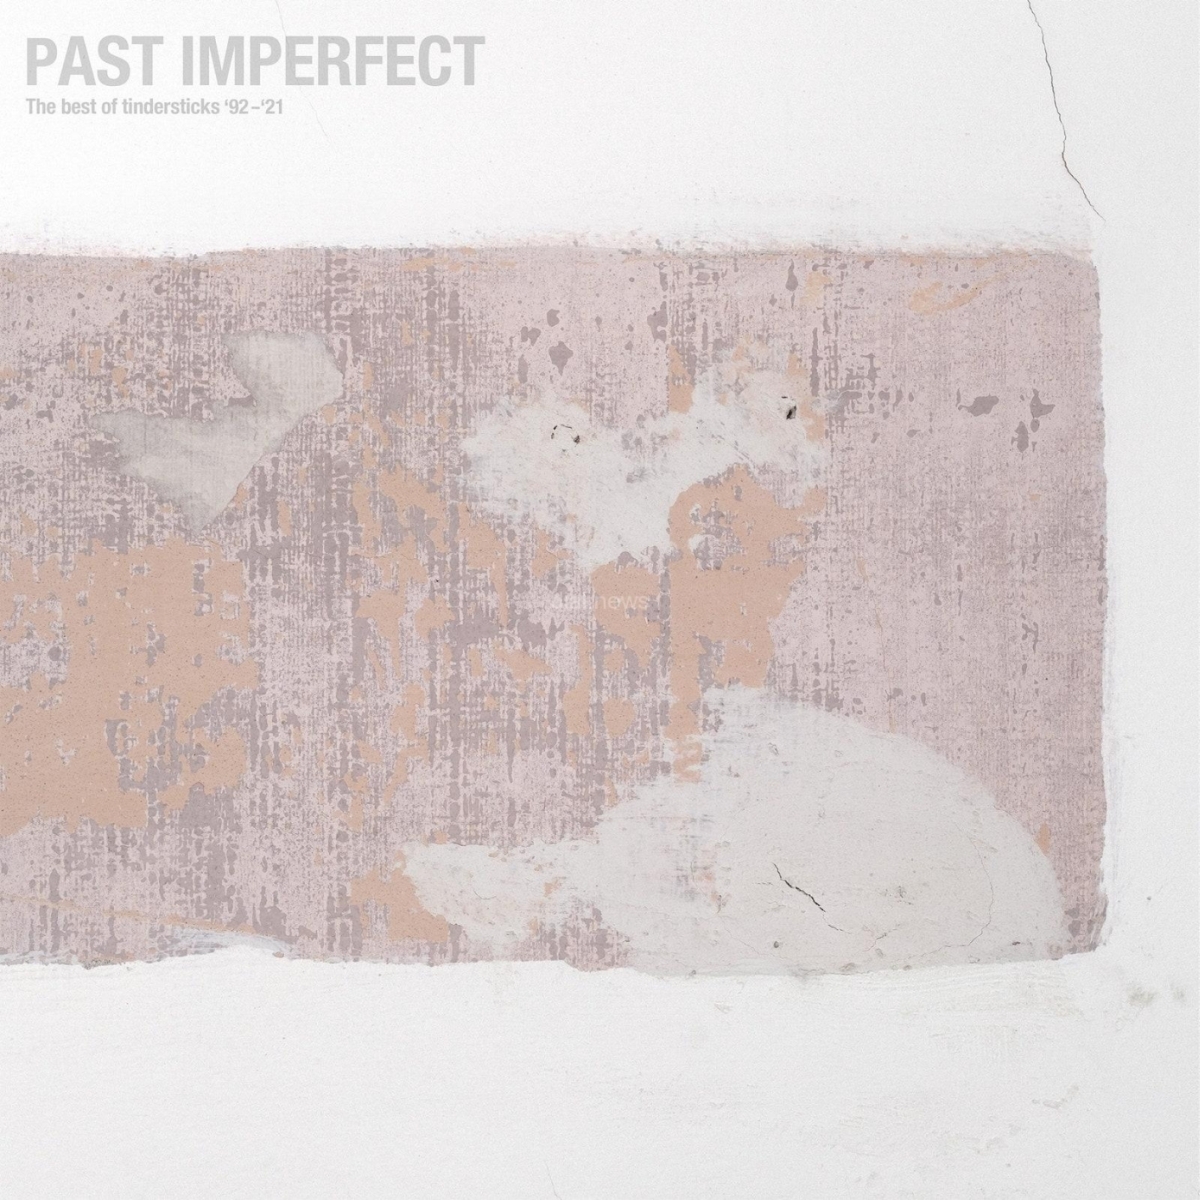 Past Imperfect : The Best Of Tindersticks '92-'21